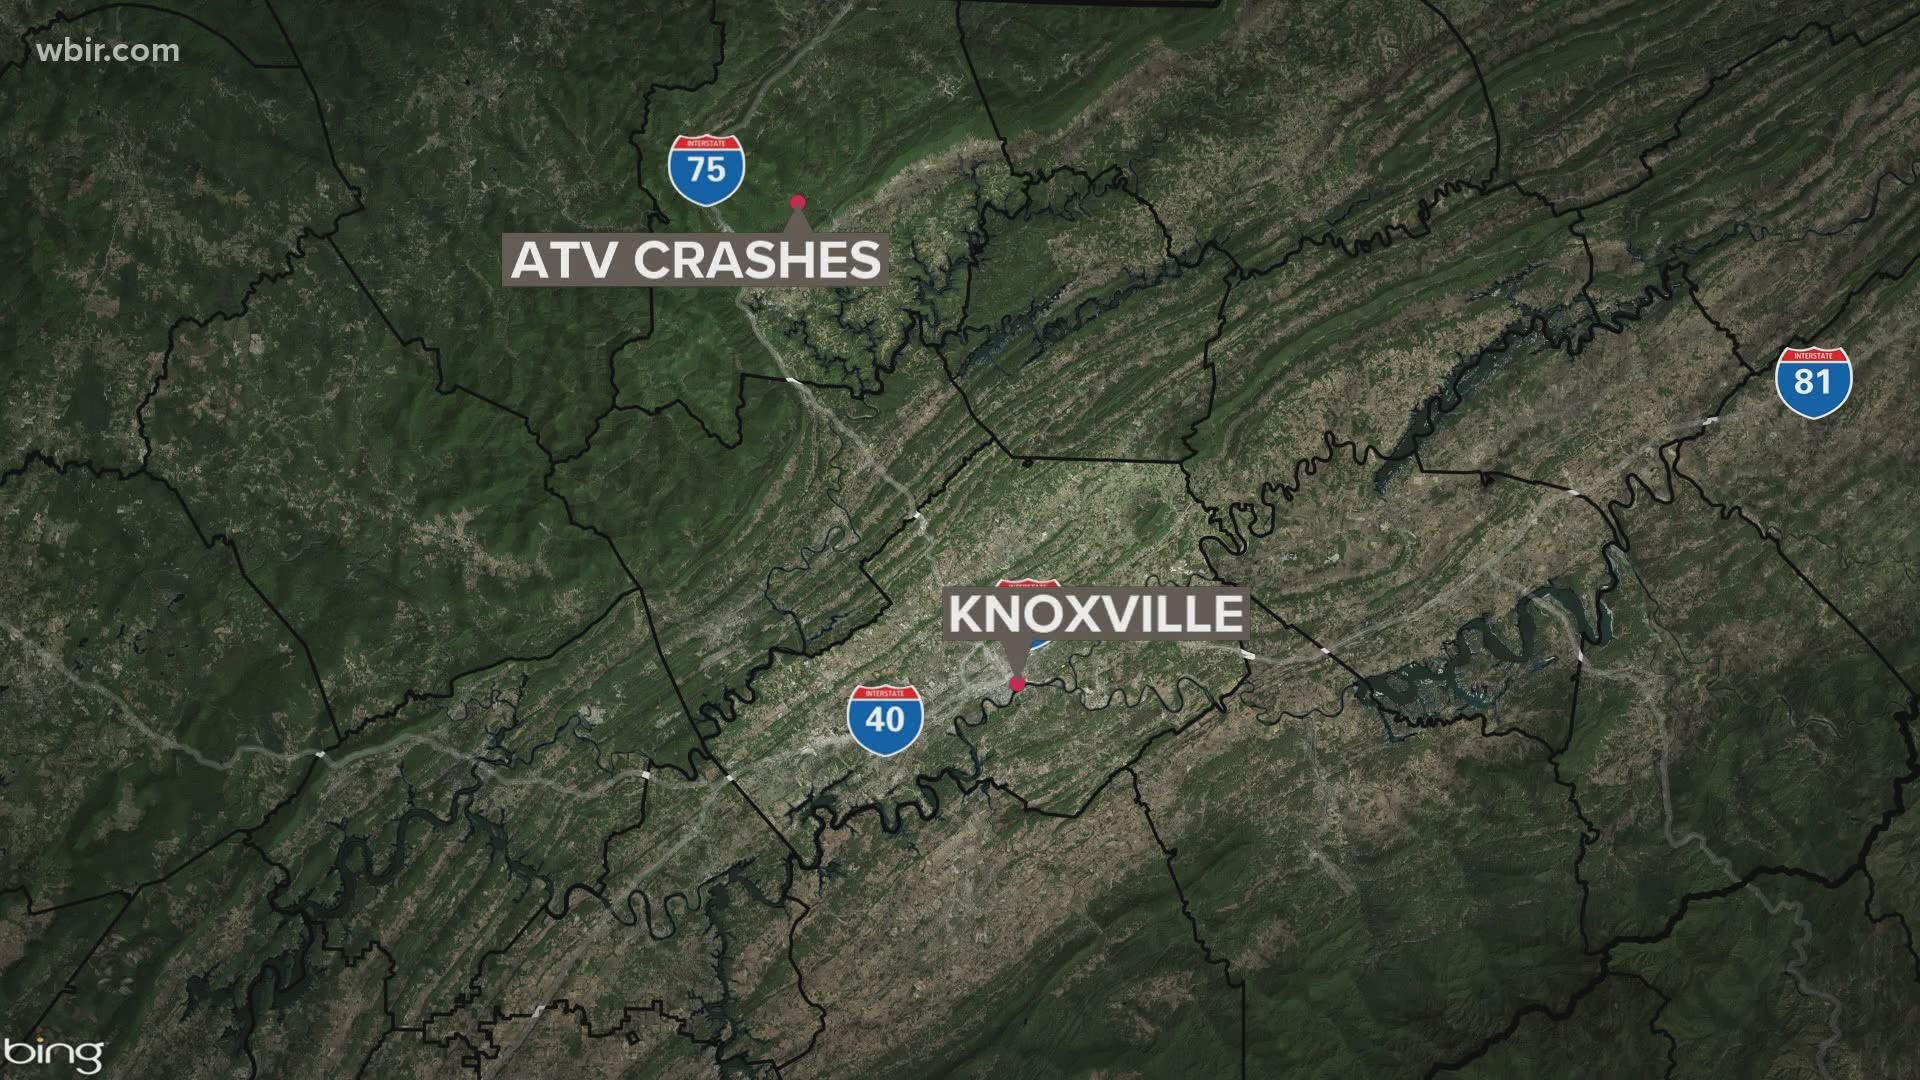 Wildlife officials are investigating two ATV crashes on the North Cumberland Wildlife Management area.